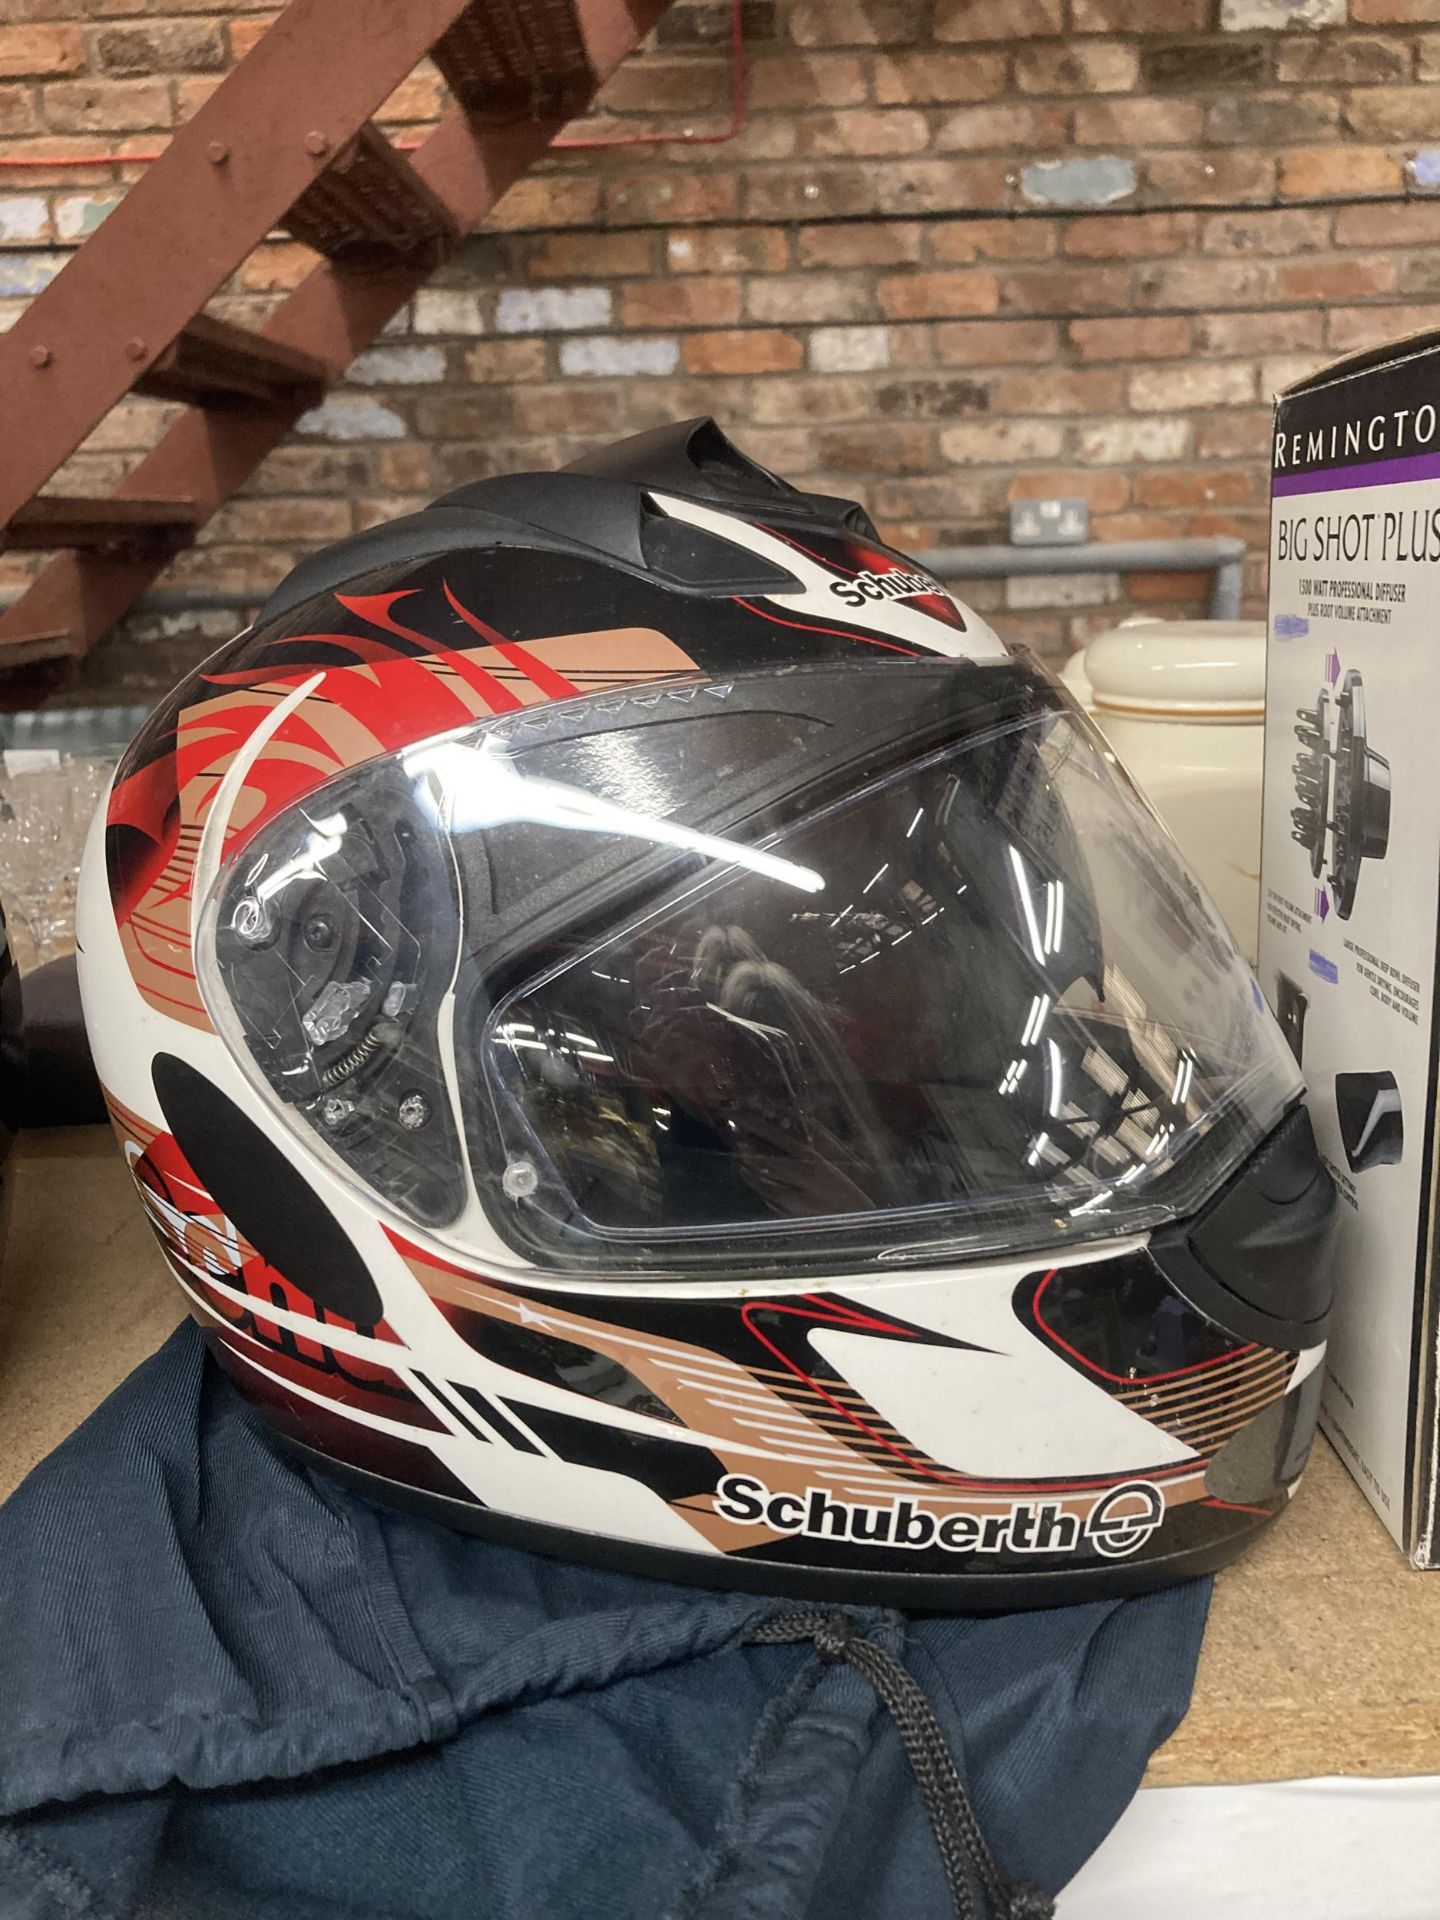 A SCHUBERTH MOTORCYCLE HELMET WITH BAG - Image 2 of 2